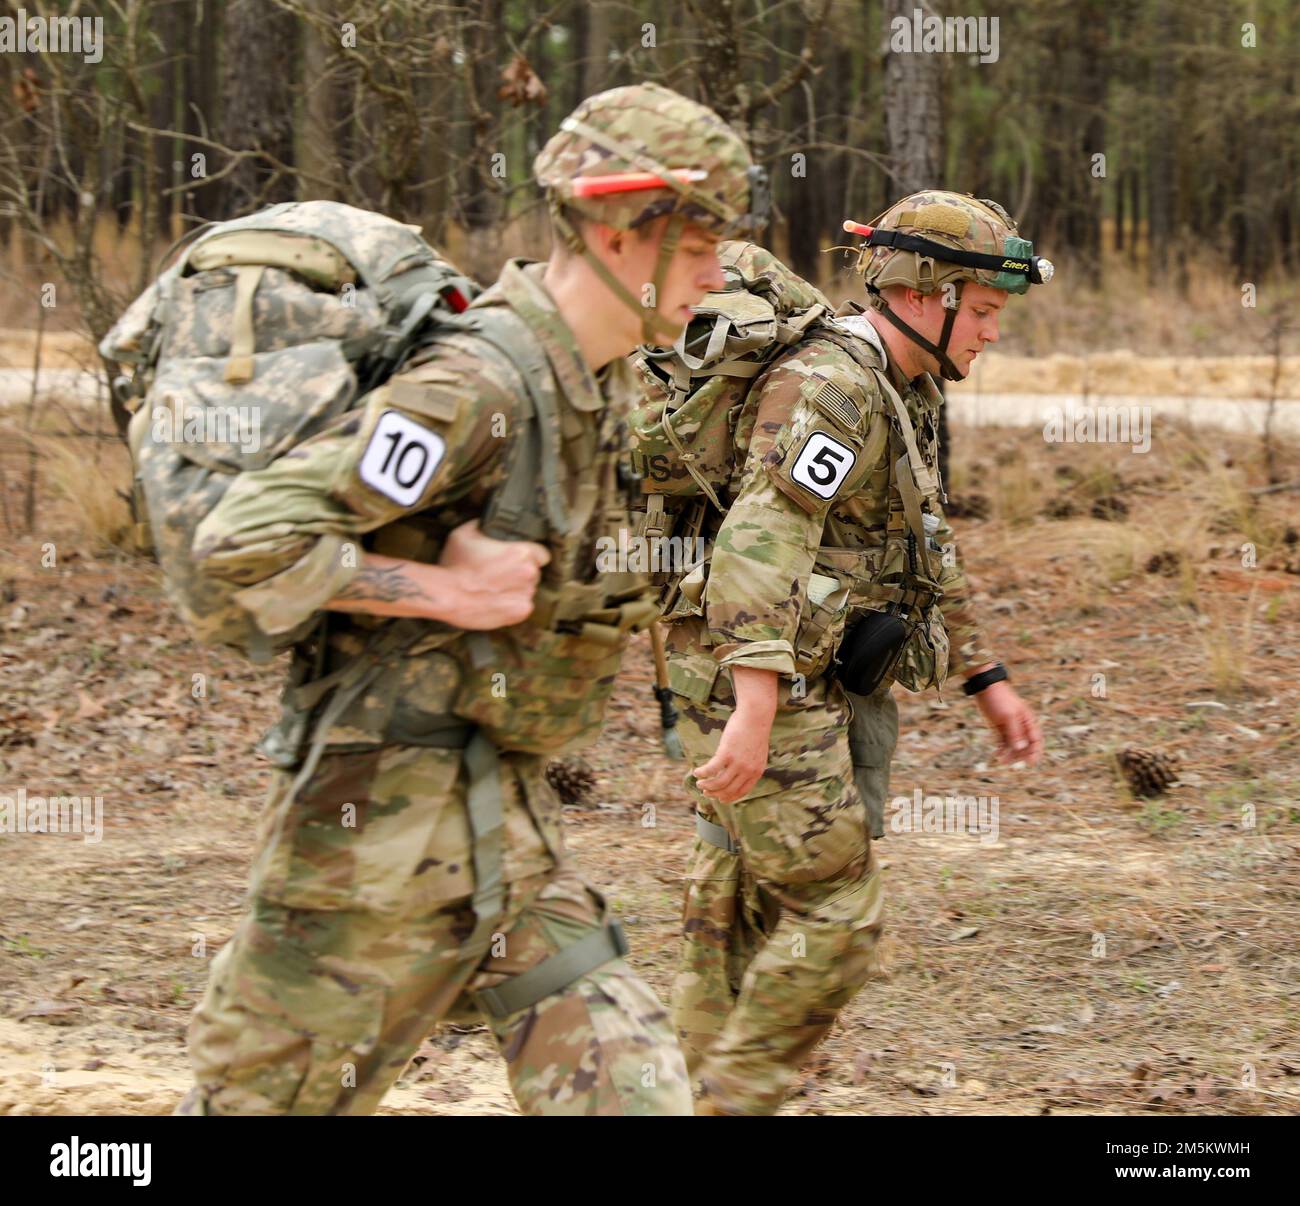 U.S. Army soldiers participate in a ruck at Fort Bragg, N.C. on 23 March 2022. The soldiers from units on Fort Bragg competed in the Best CBRN Competition, which tests proficiency in their Military Occupation Specialty(MOS) skills, as well as knowledge of Warrior Tasks and Battle Drills. Stock Photo